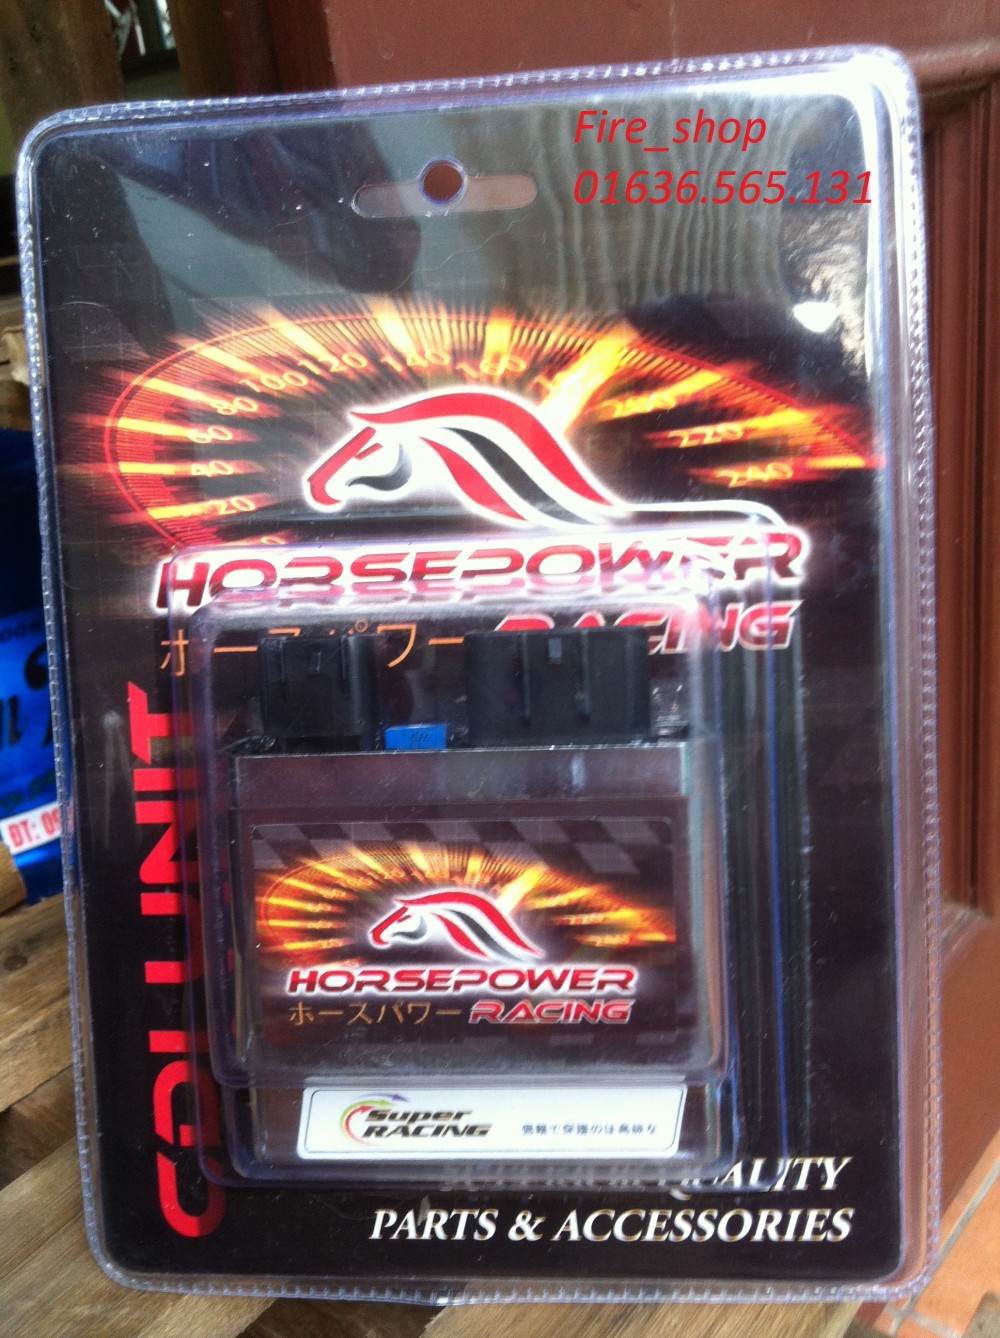 IC banjing horse power racing tim cho Exciter Dream Wave Fire_shop - 3